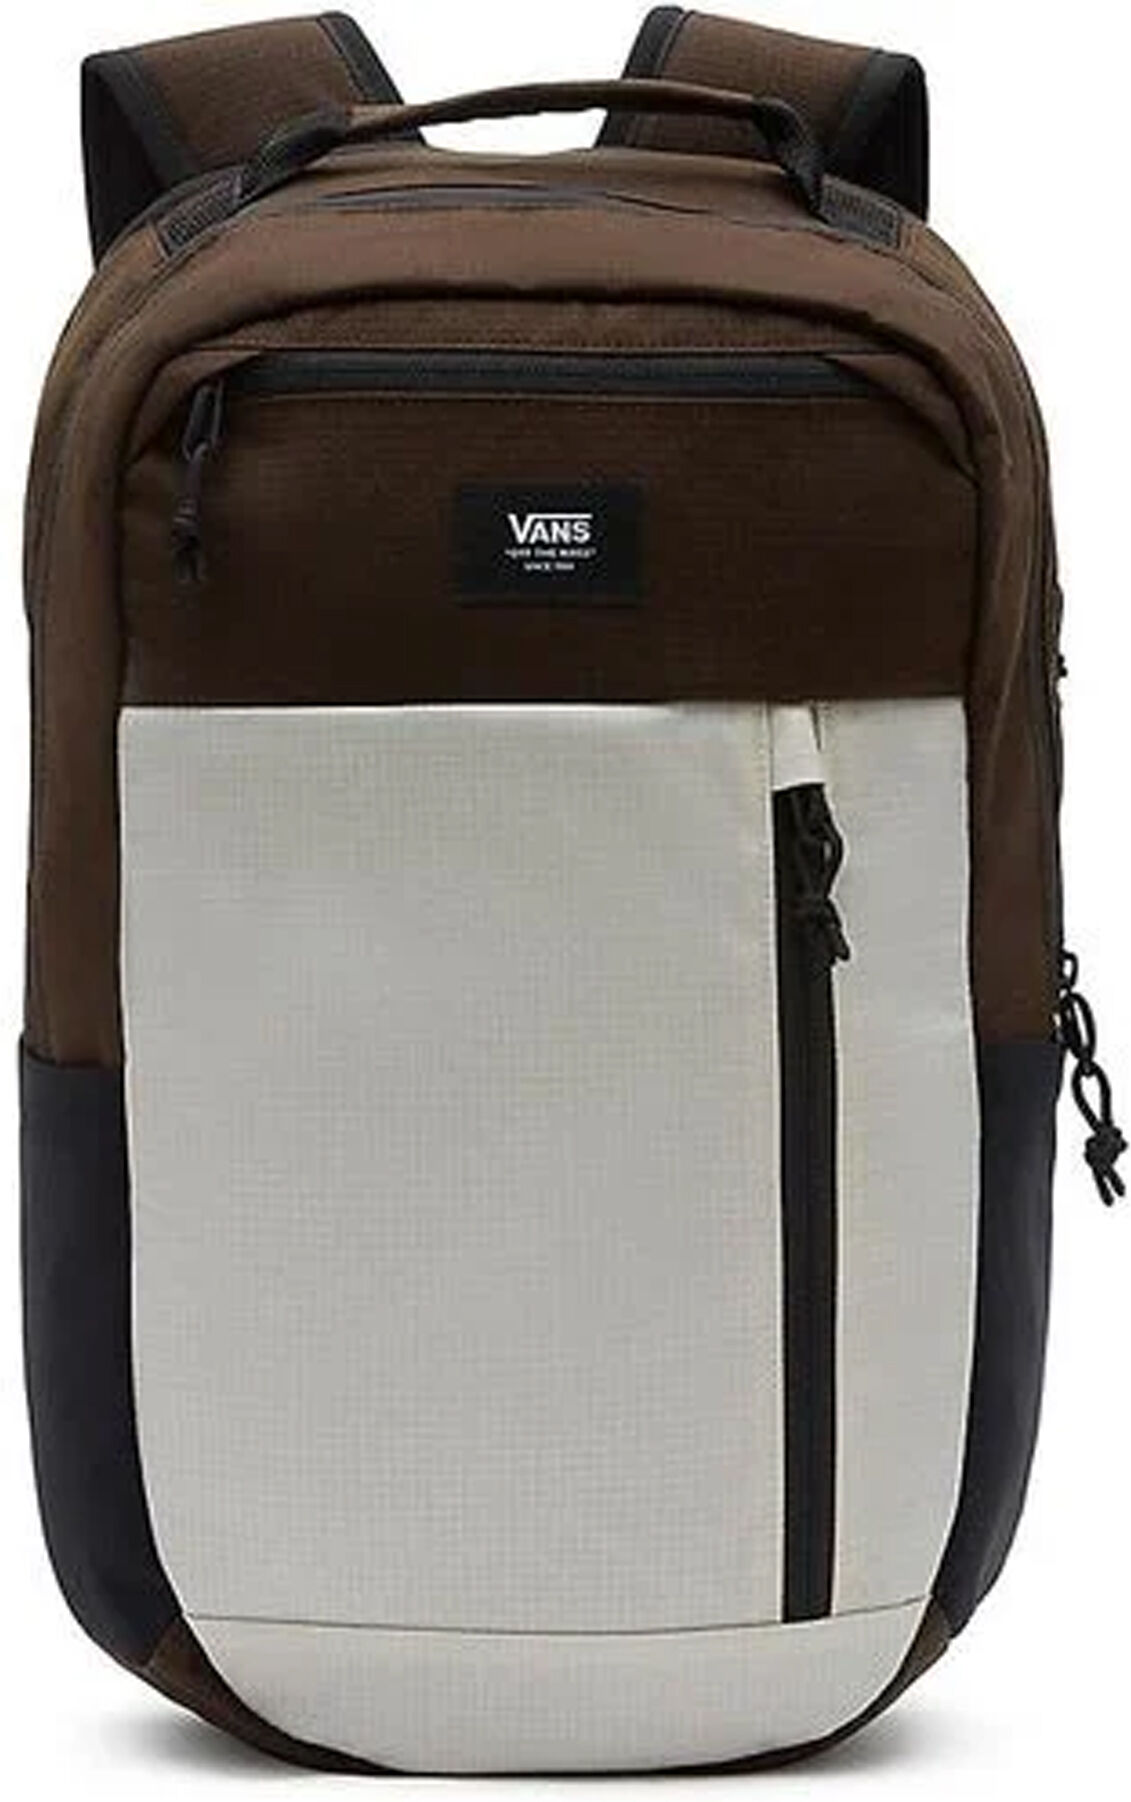 Vans MN DISORDER PLUS BACKPACK OATMEAL One Size